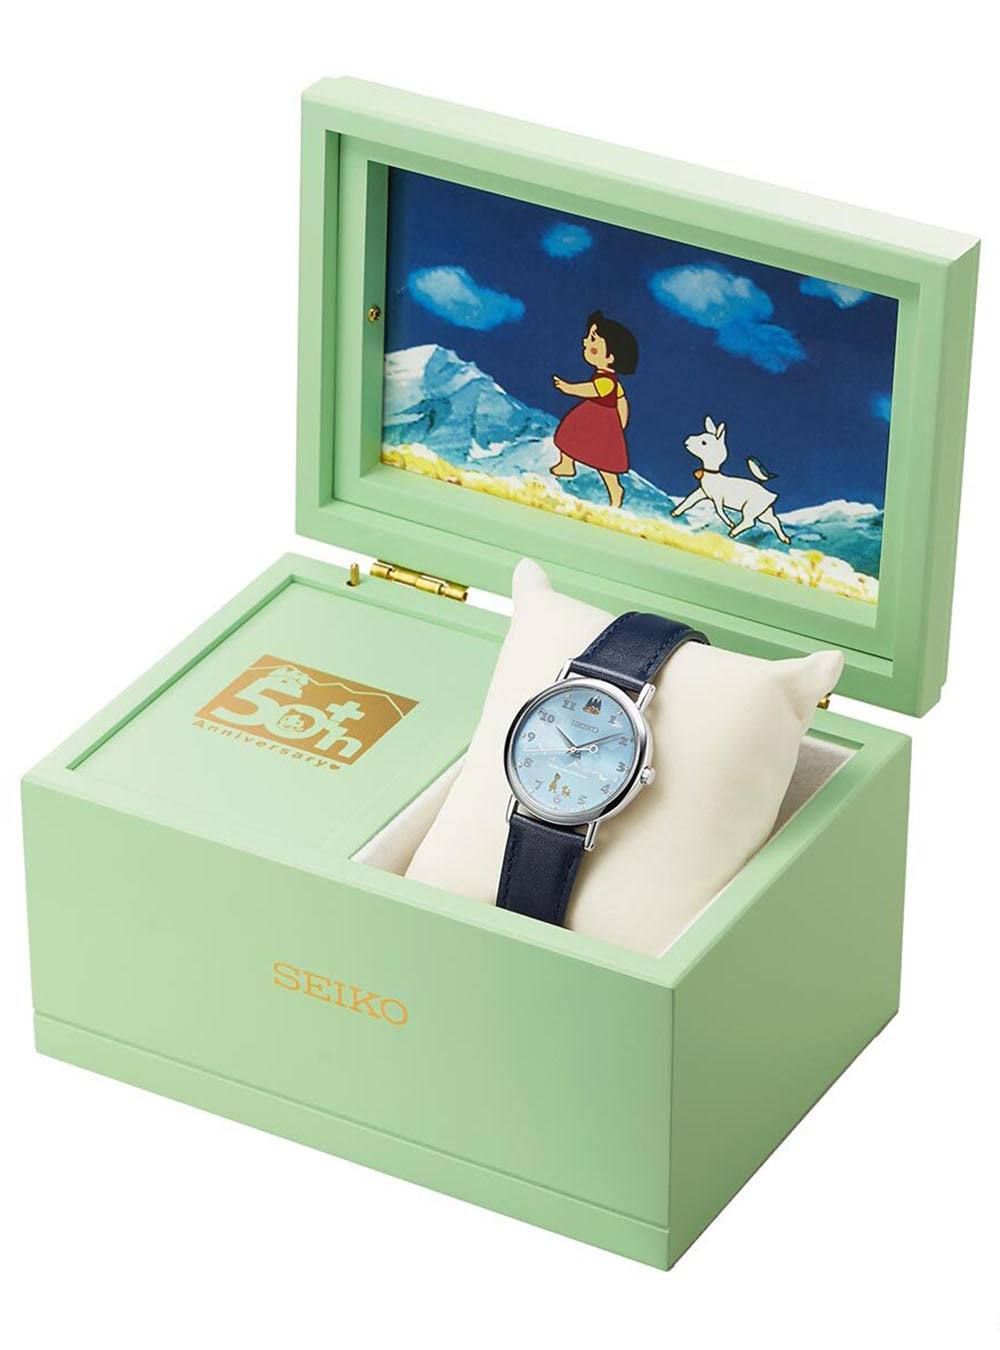 SEIKO x HEIDI A GIRL OF THE ALPS 50TH ANNIVERSARY WATCH LIMITED EDITION  MADE IN JAPAN